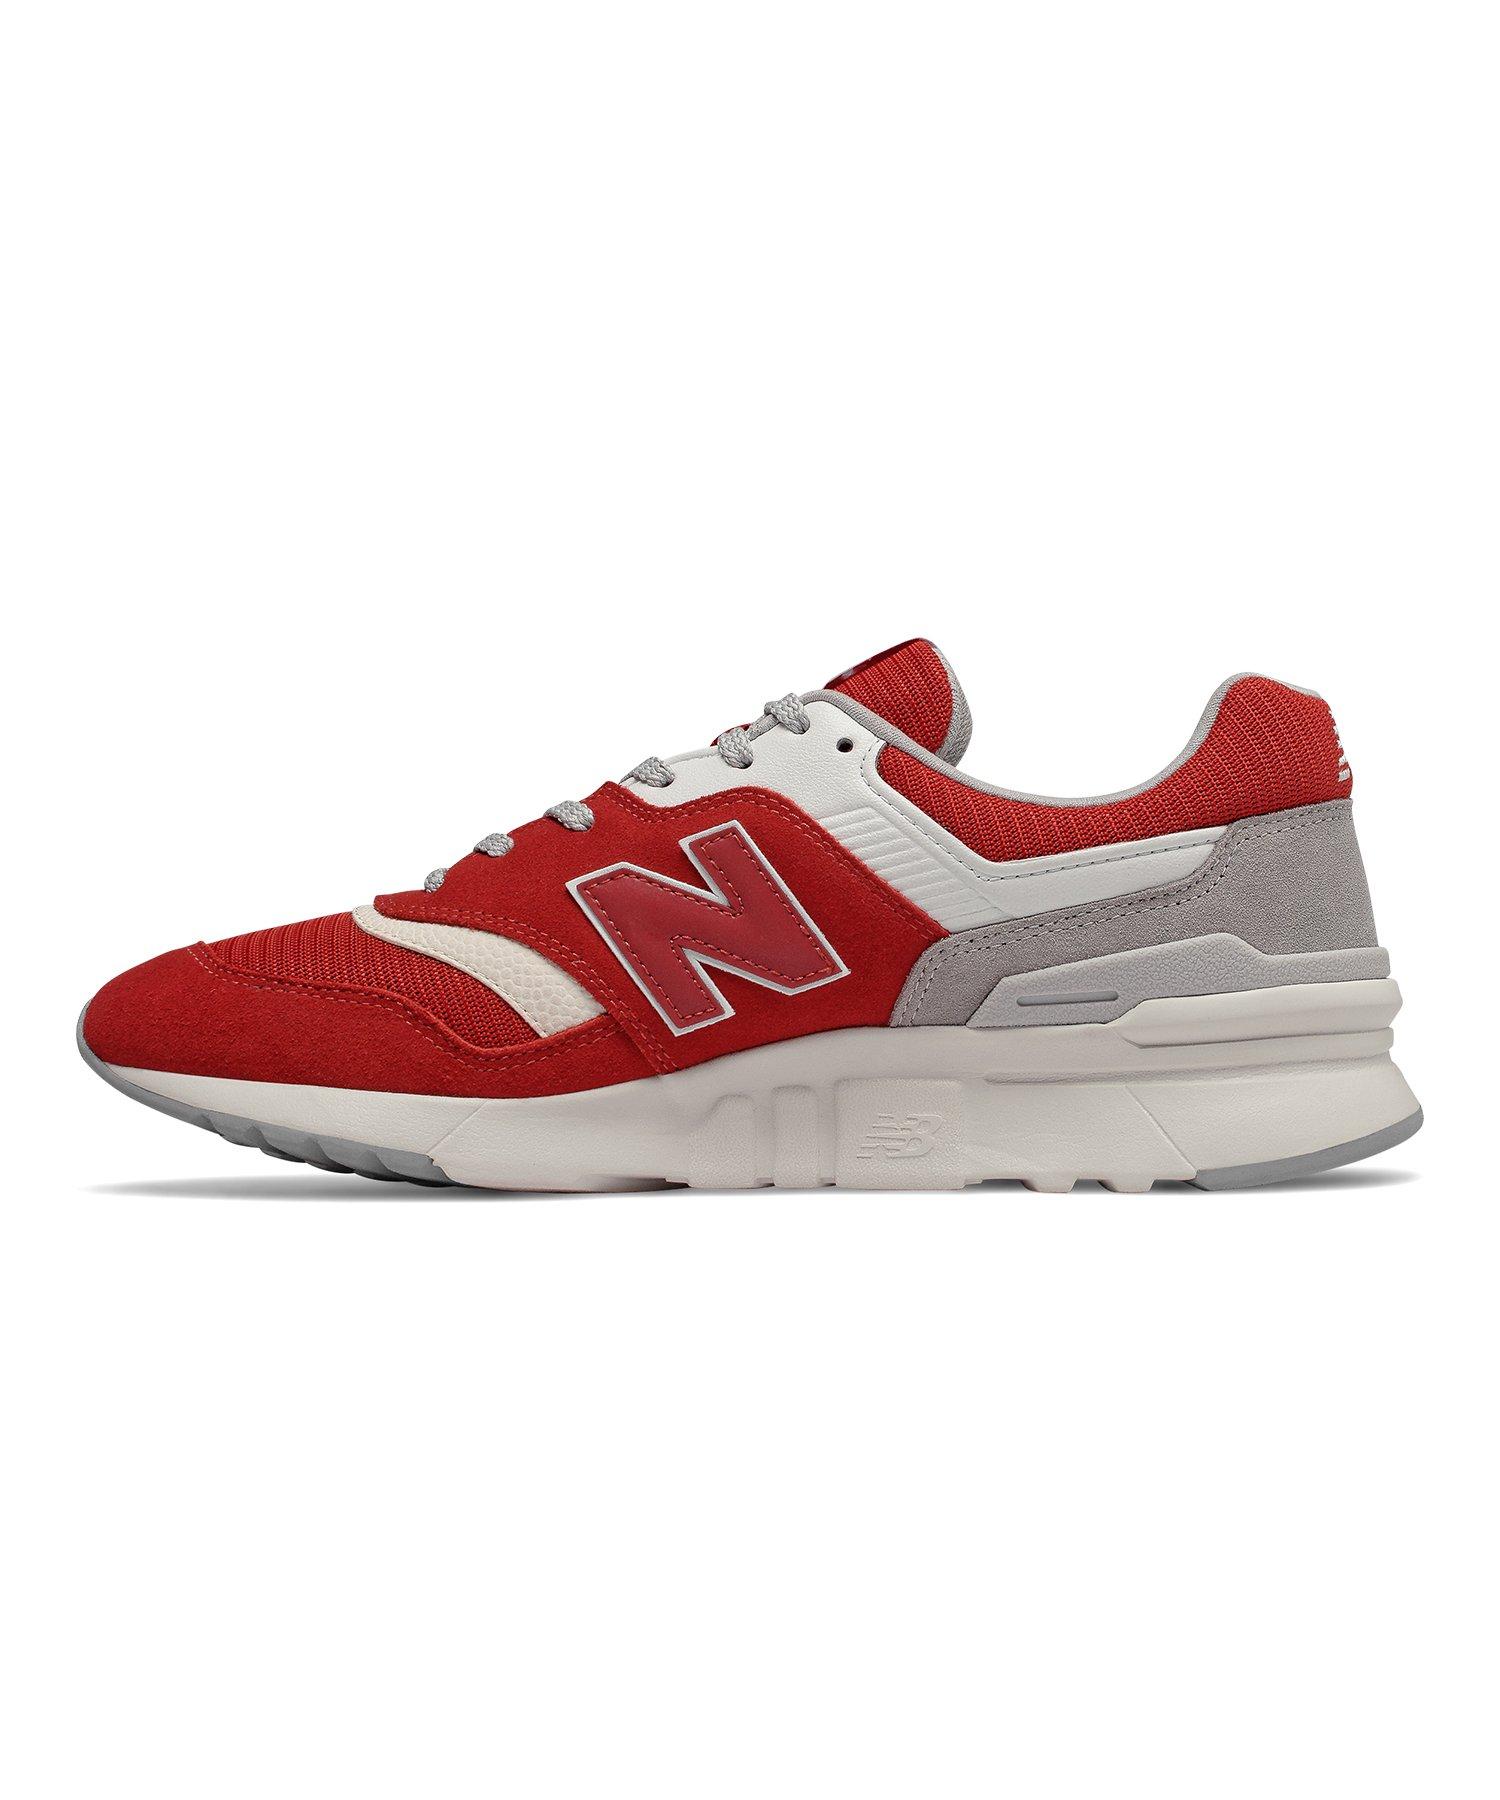 New Balance Rubber 997h Team Red for Men - Lyst